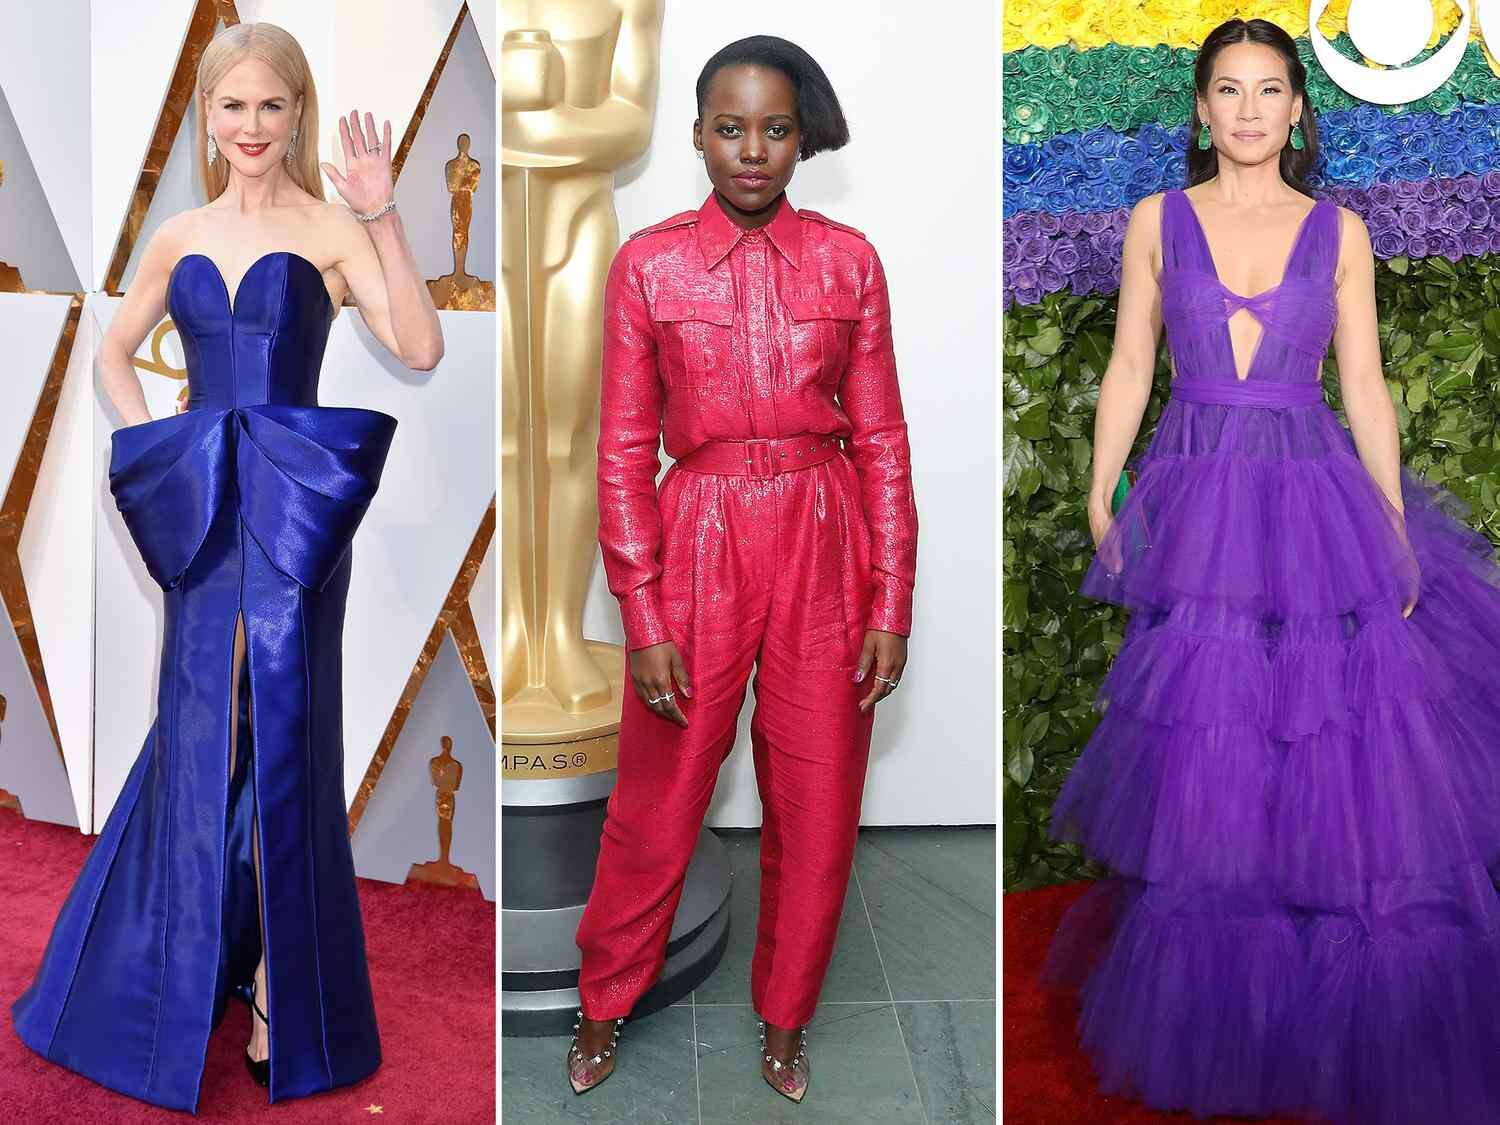 nicole kidman, lupita nyong'o, and lucy liu in colored outfits for cool skin tones